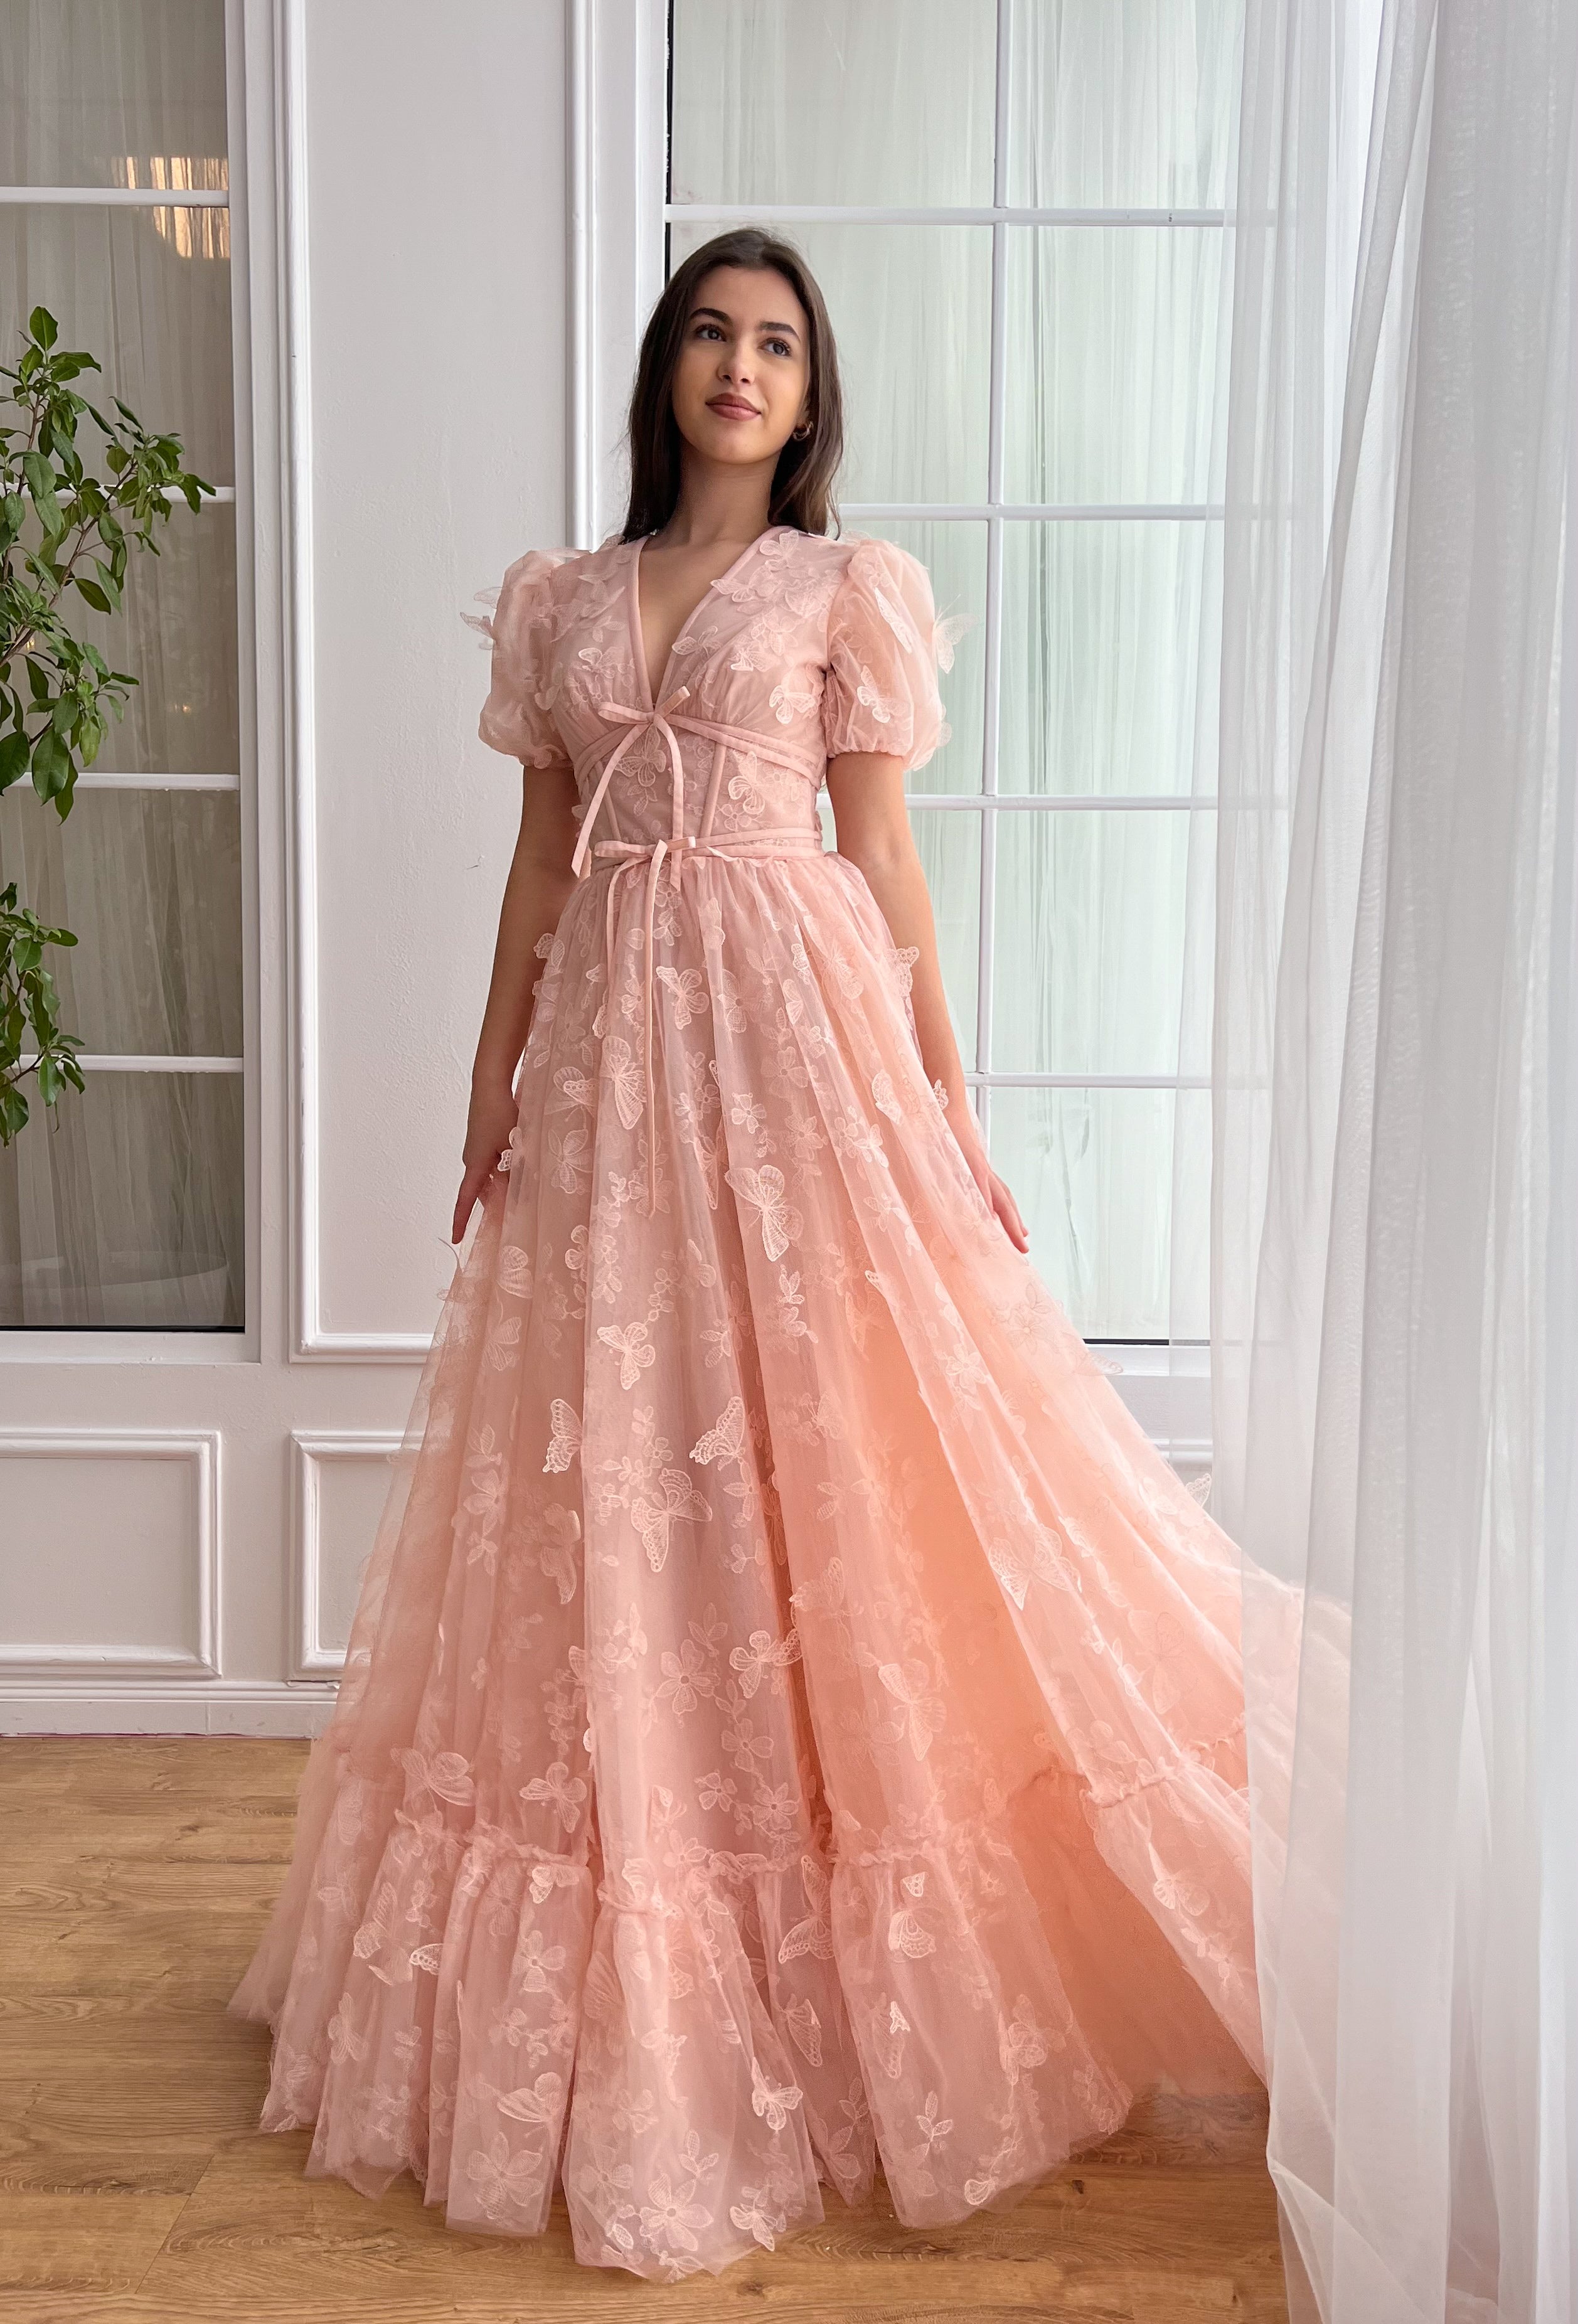 Pink Floral Lace Off-the-Shoulder Ball Gown with Cape Sleeves